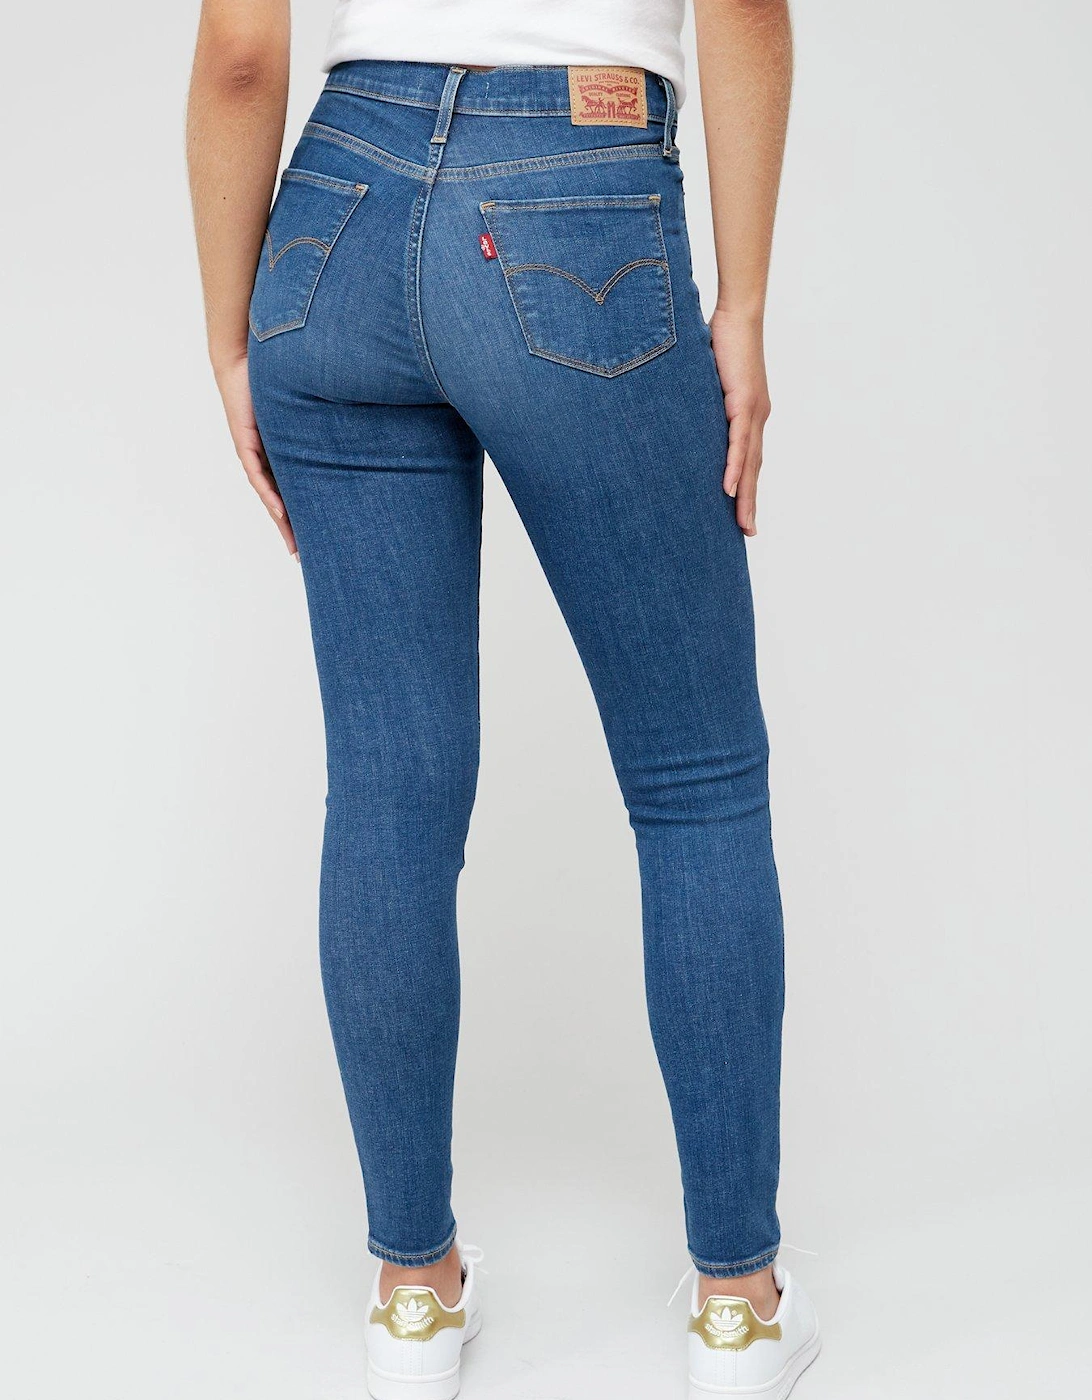 310 Shaping Super Skinny Jean - Quebec Autumn - Blue